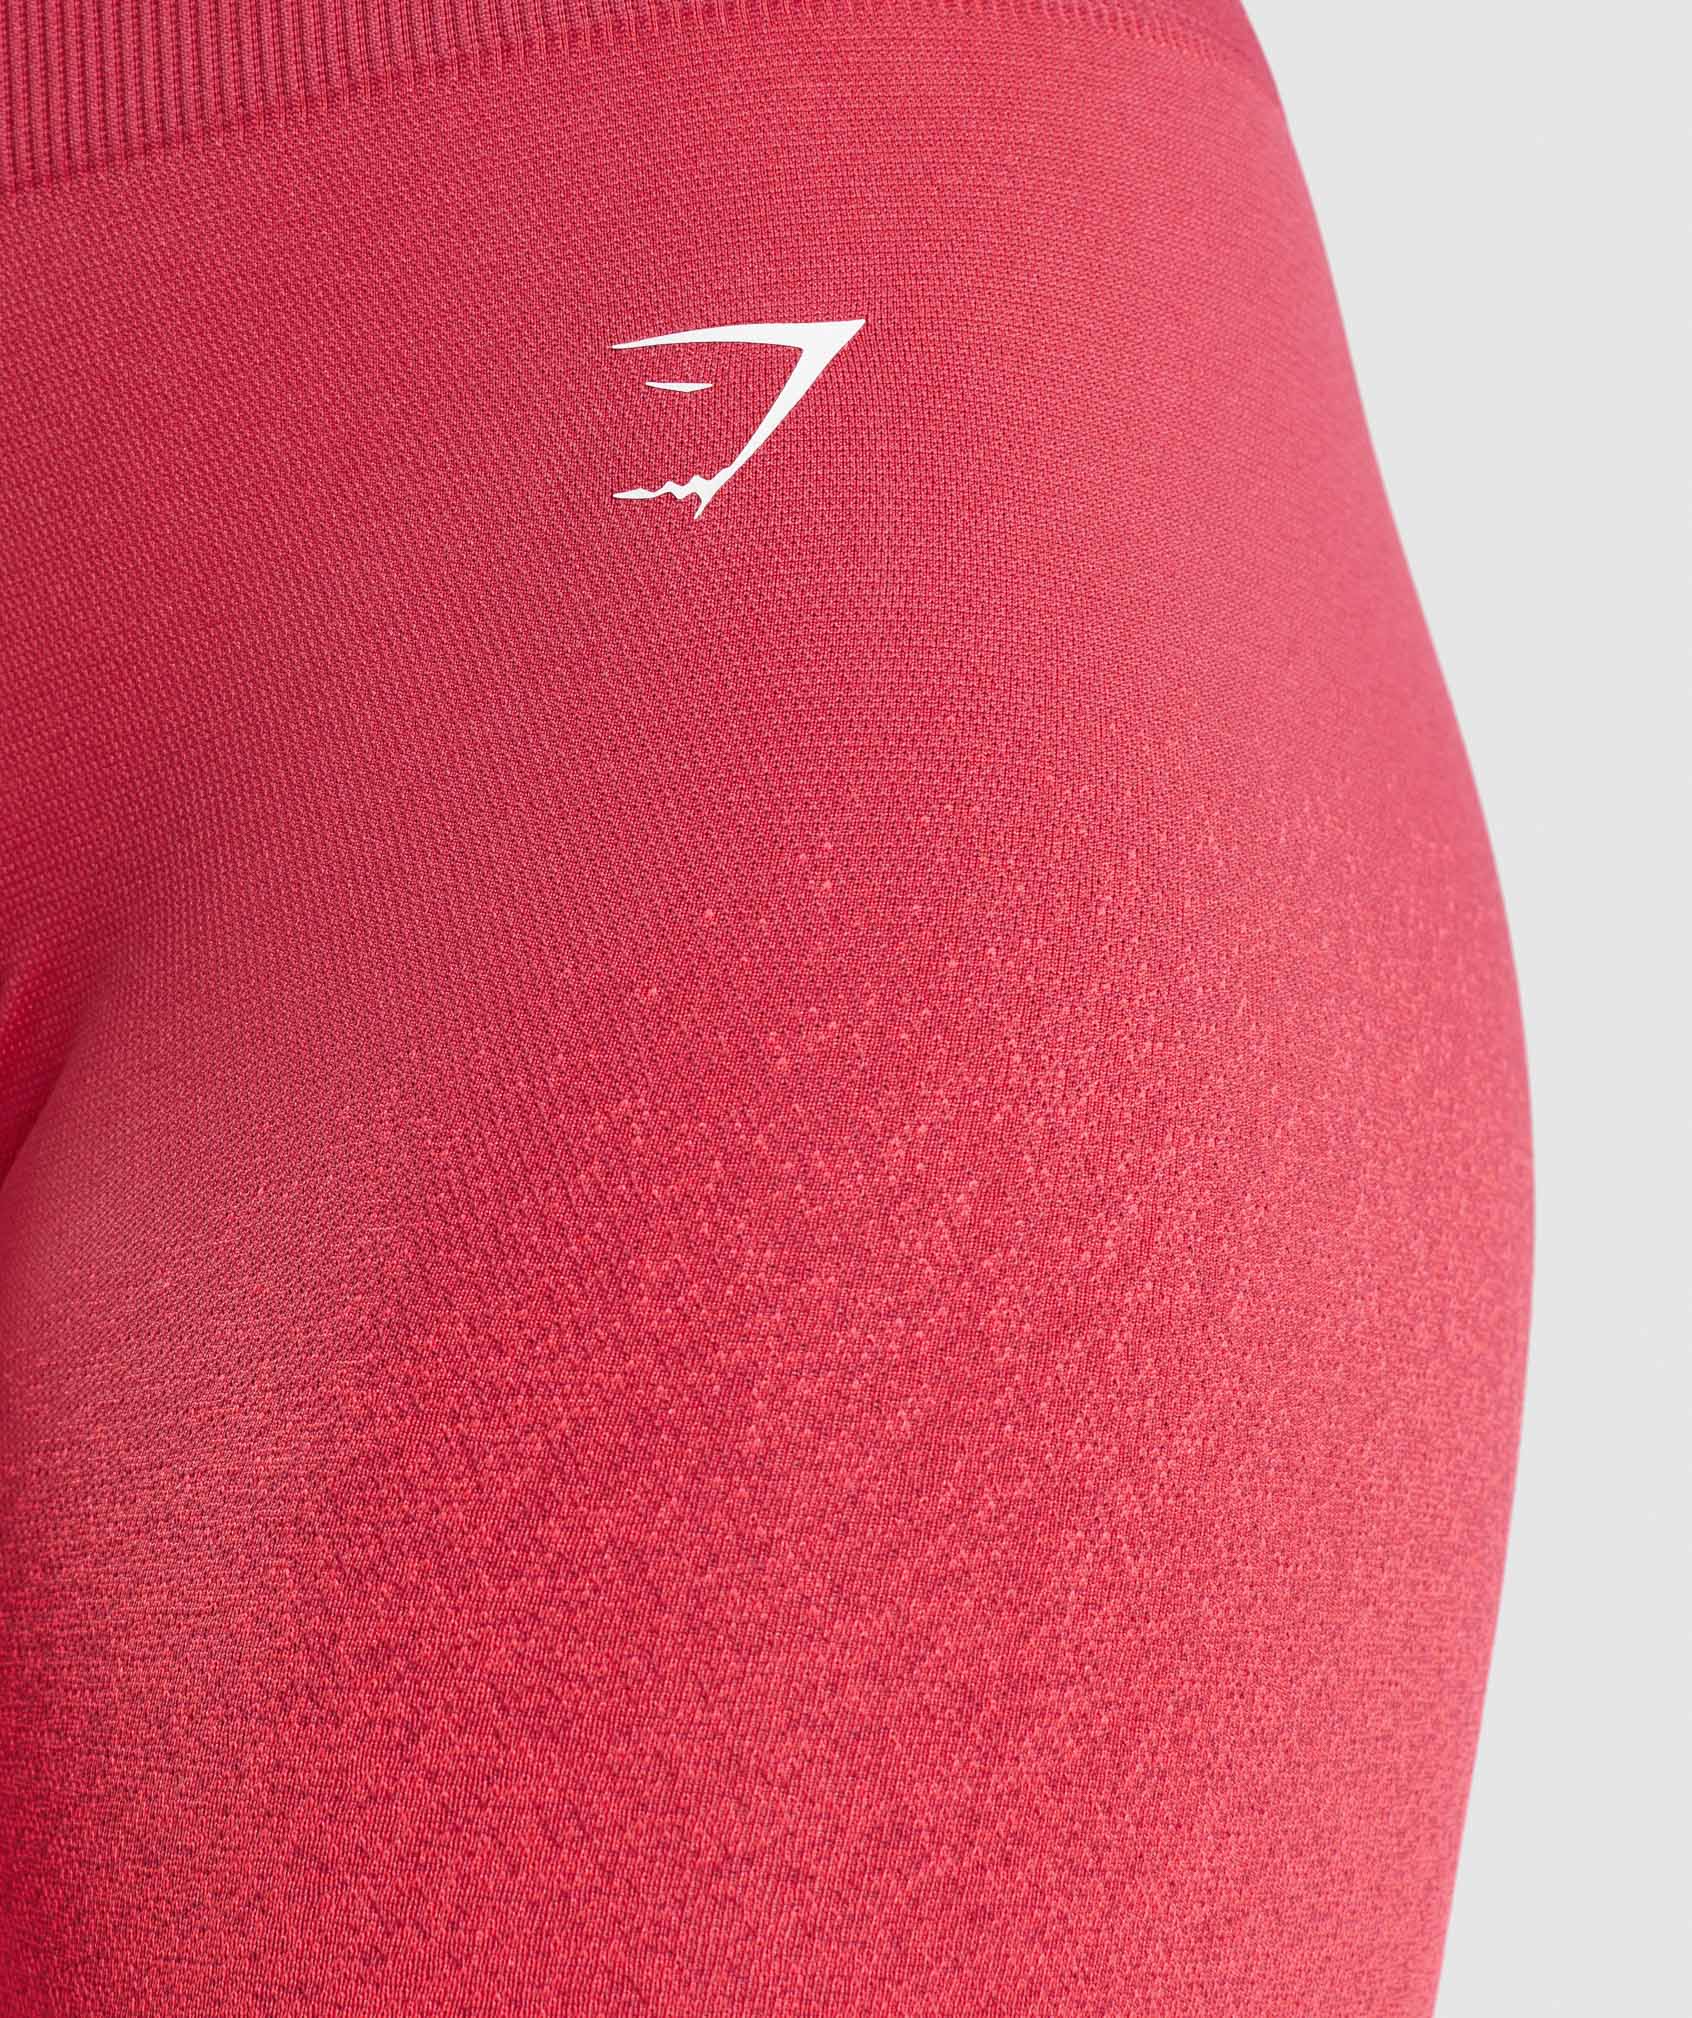 Adapt Ombre Seamless Cycling Shorts in Pink/Red - view 6